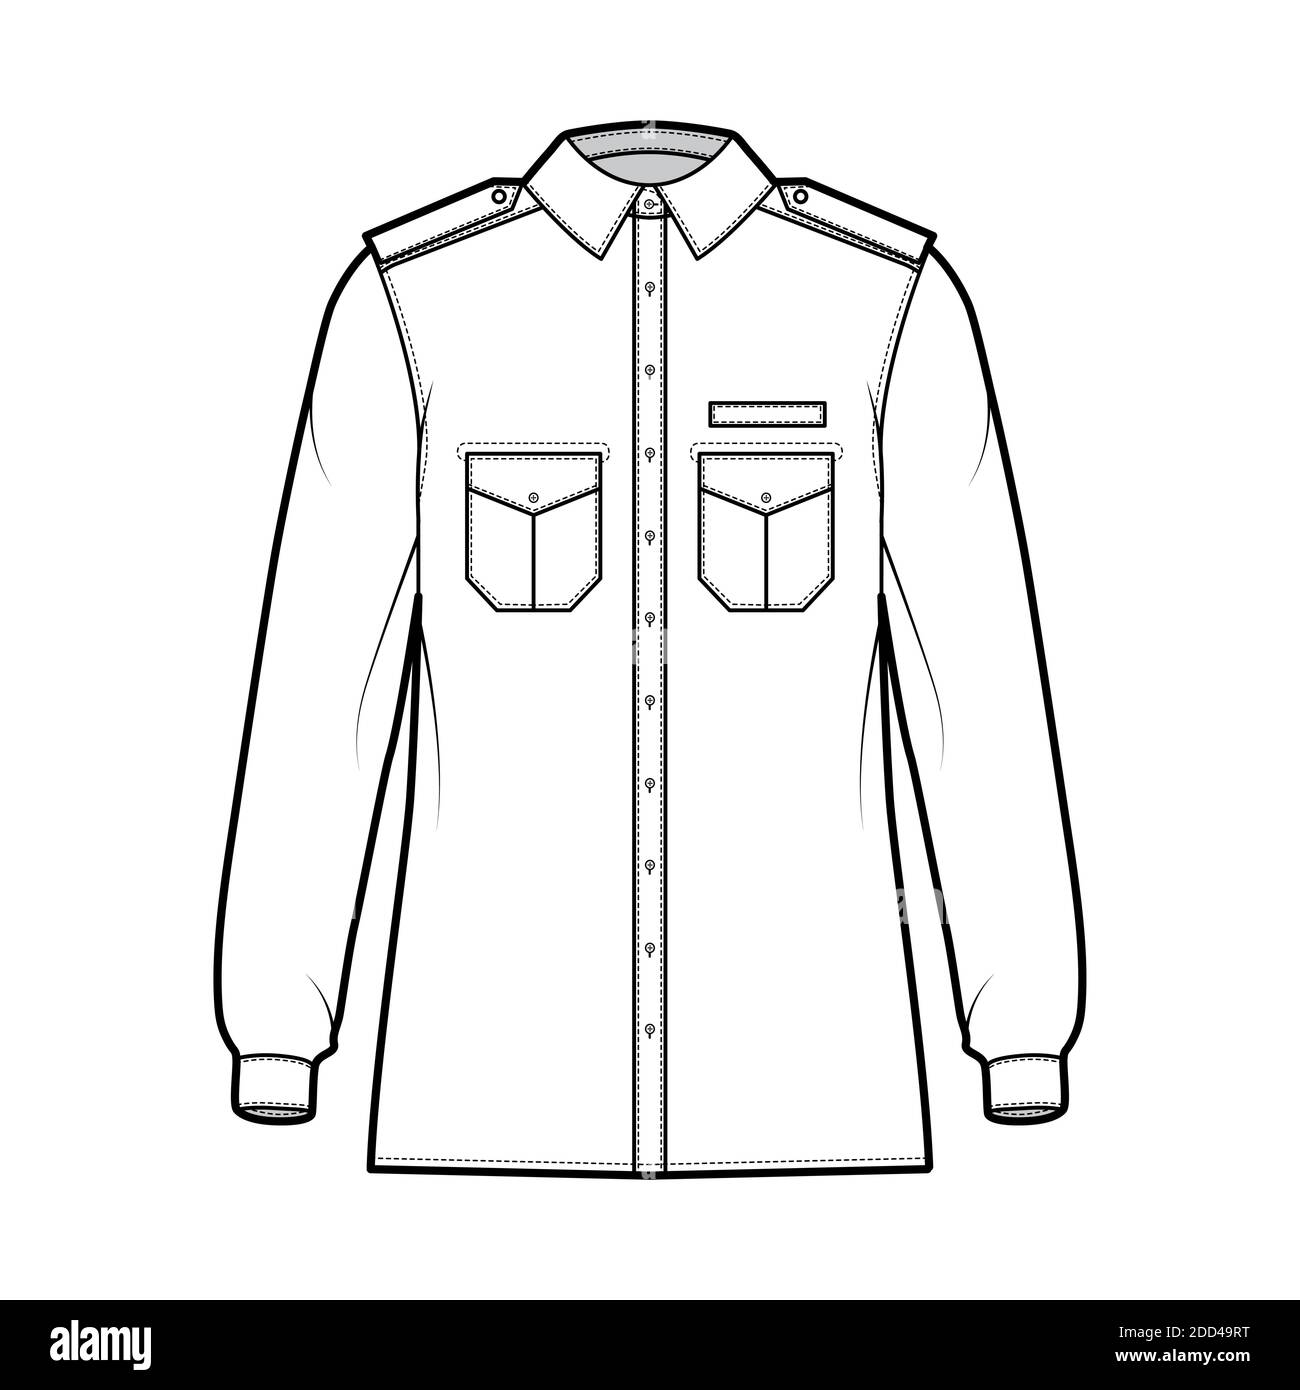 Shirt military technical fashion illustration with epaulette, flaps angled pockets, long sleeve, relax fit, button-down, classic collar. Flat template front, white color. Women men unisex top CAD Stock Vector